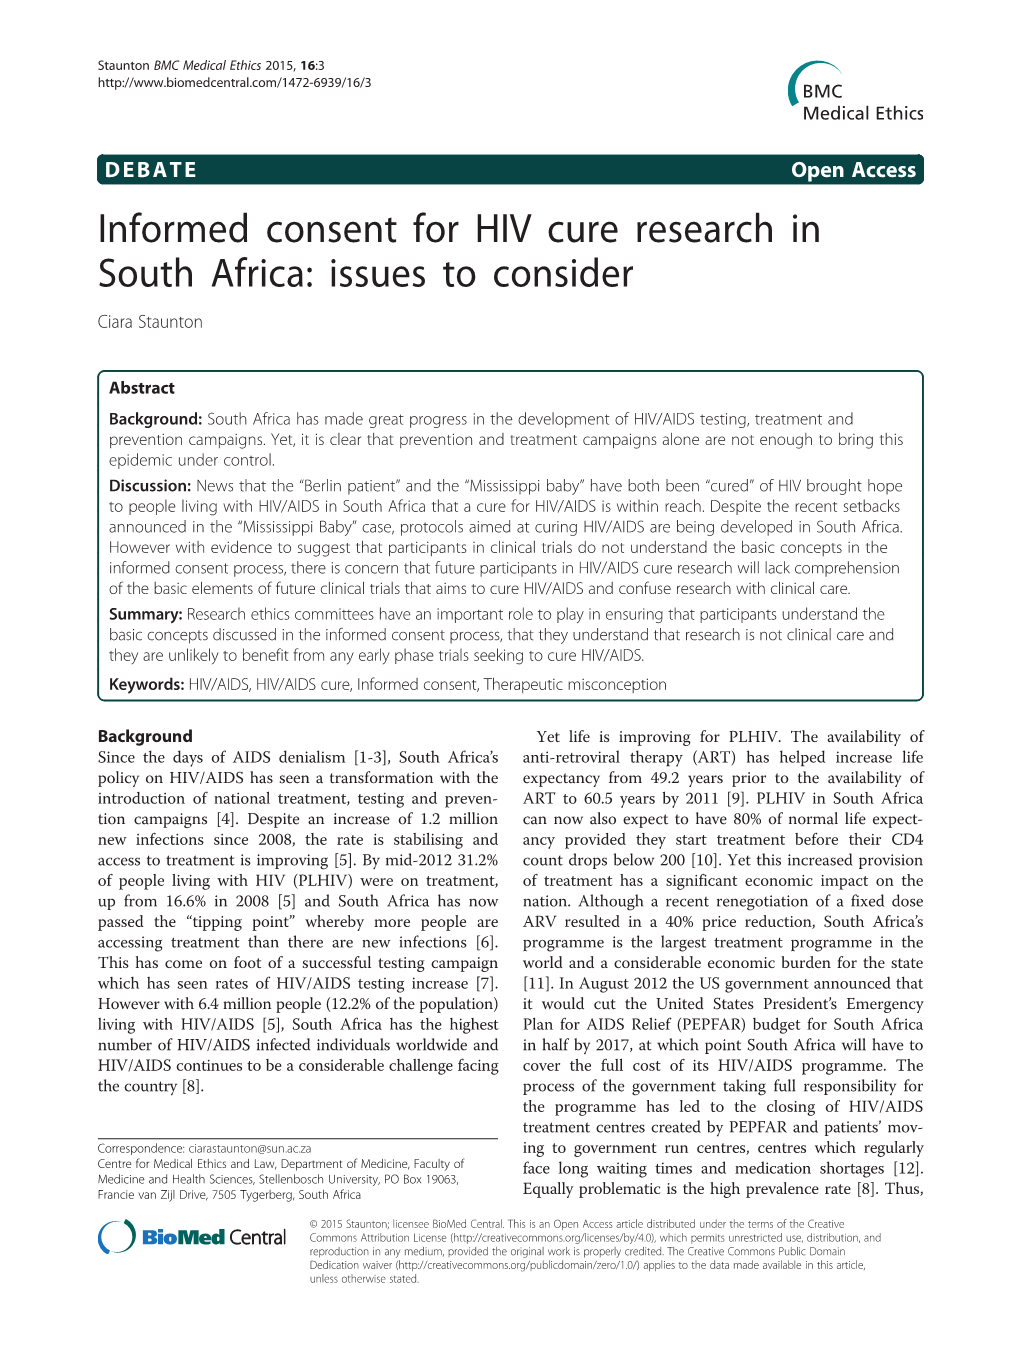 Informed Consent for HIV Cure Research in South Africa: Issues to Consider Ciara Staunton